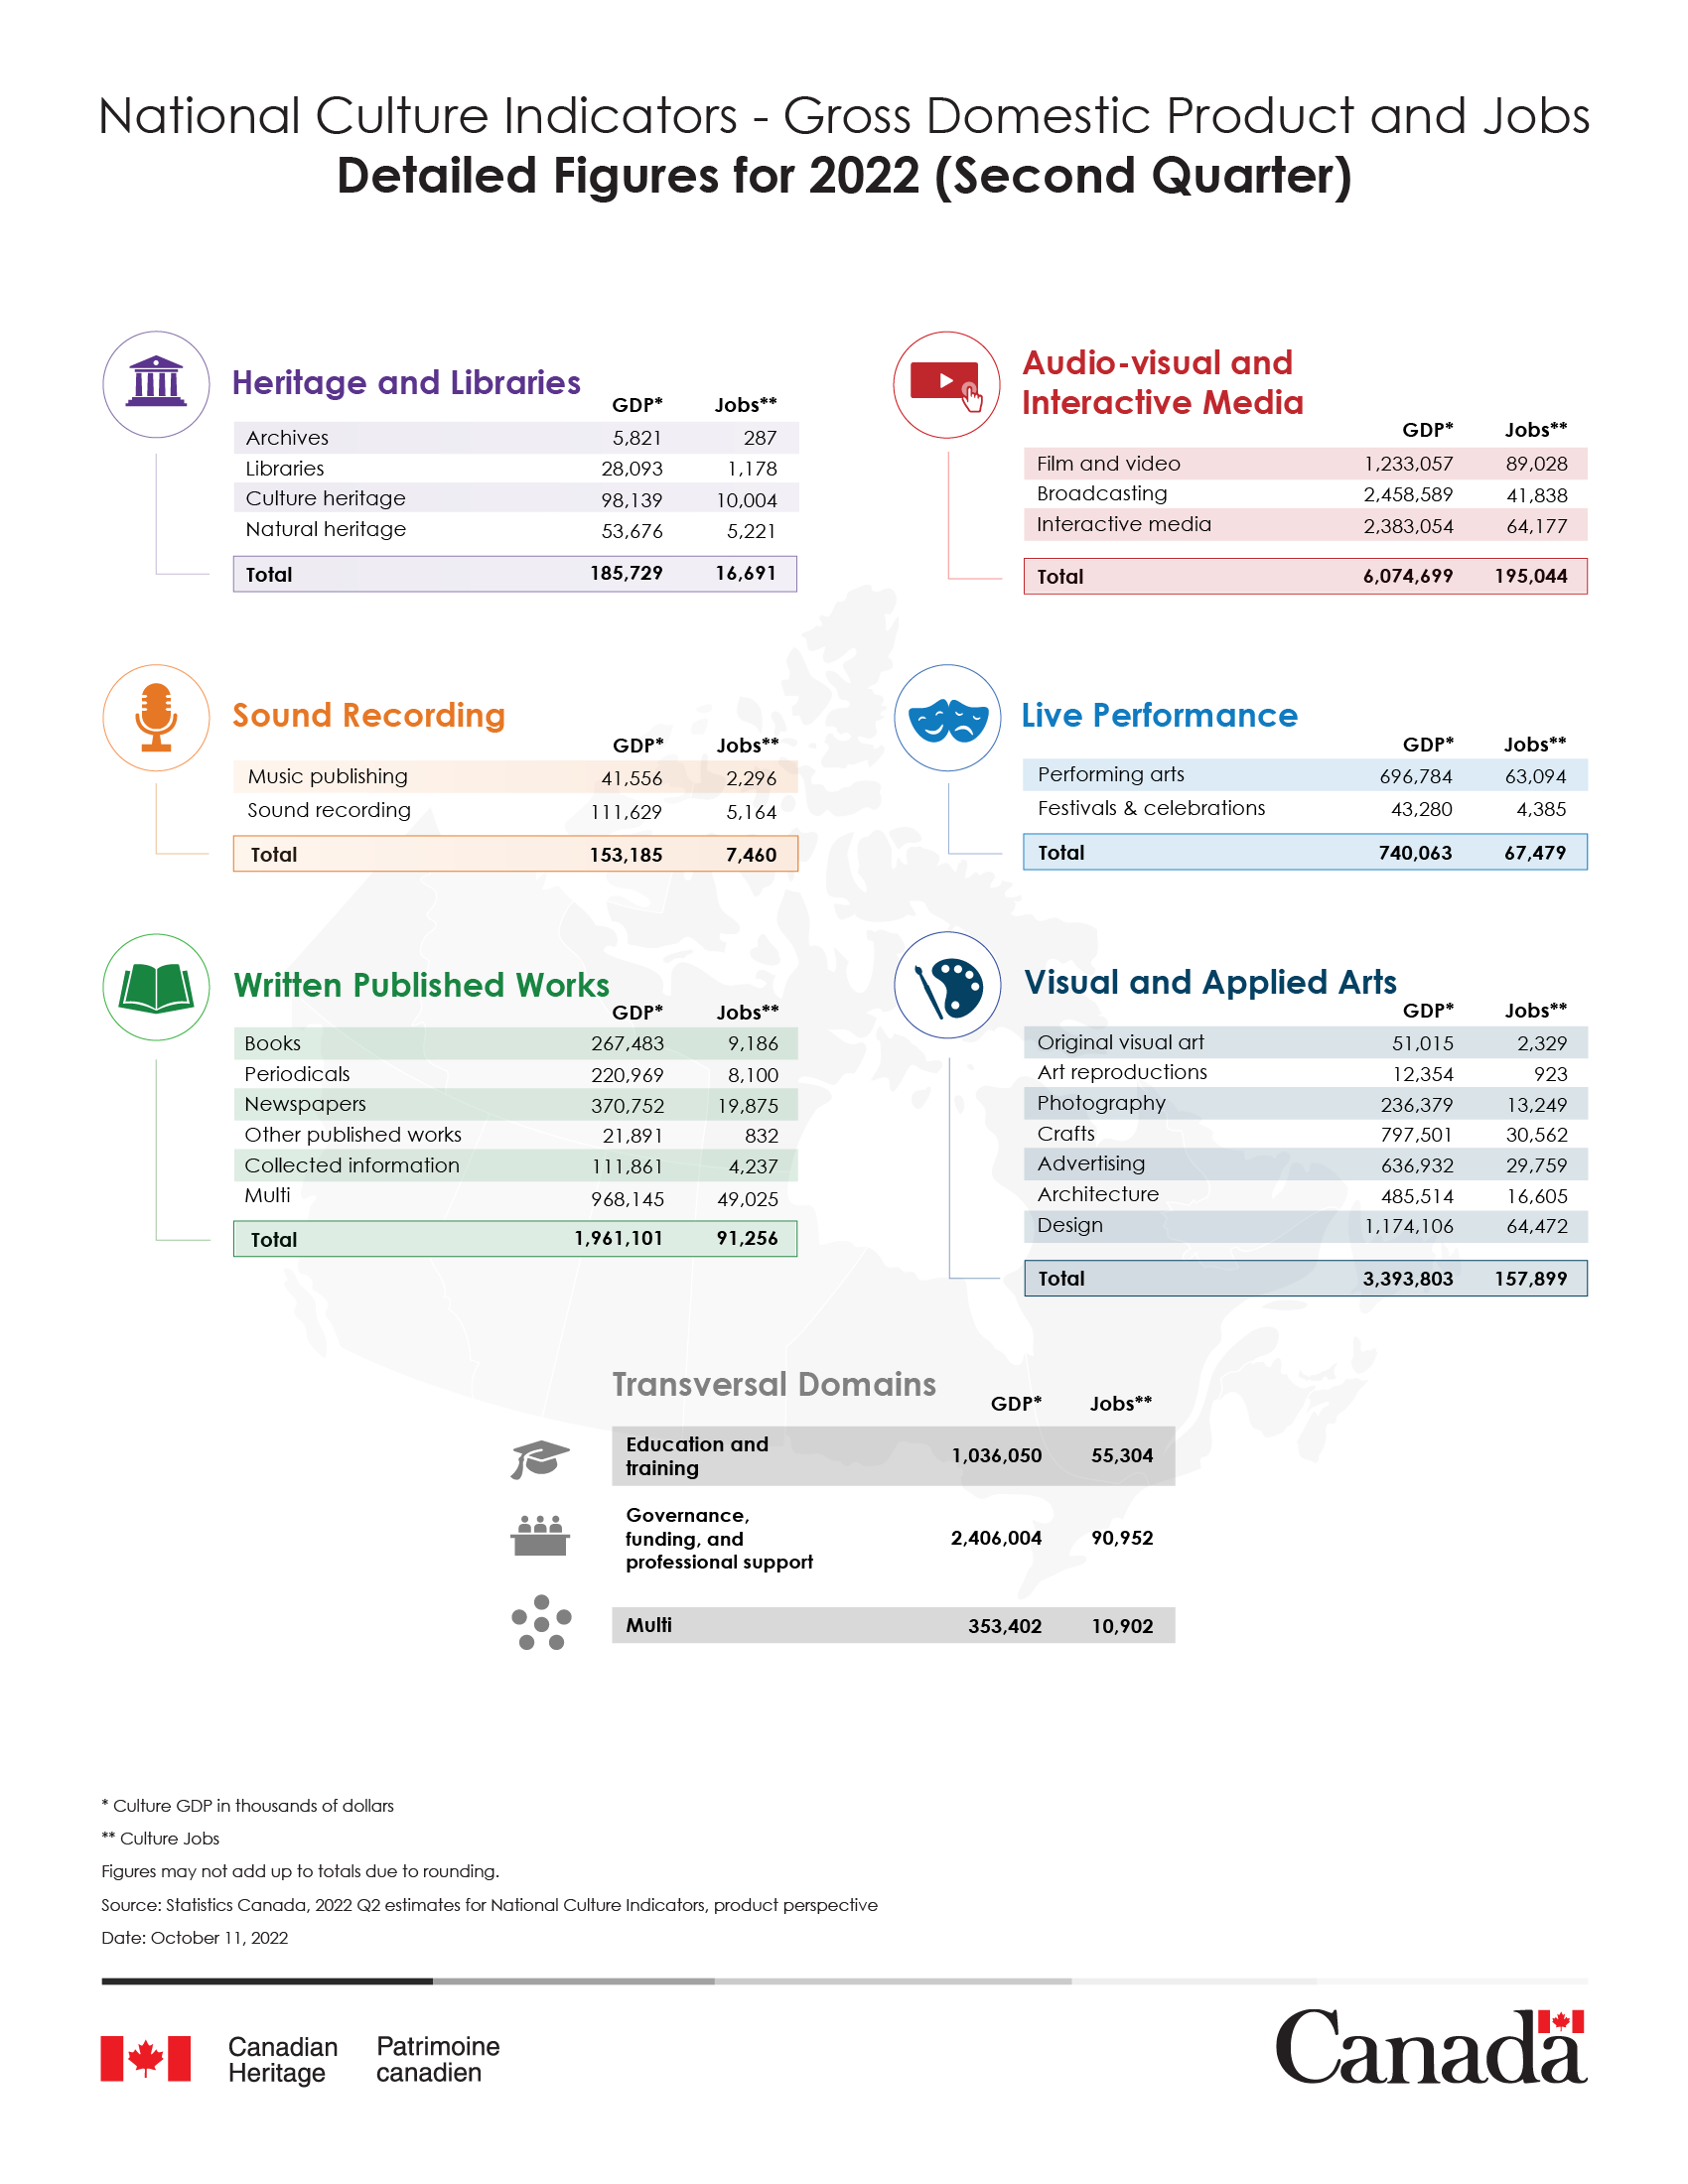 Infographic National Culture Indicators - Gross Domestic Product and Jobs - Detailed Figures for Second Quarter of 2022